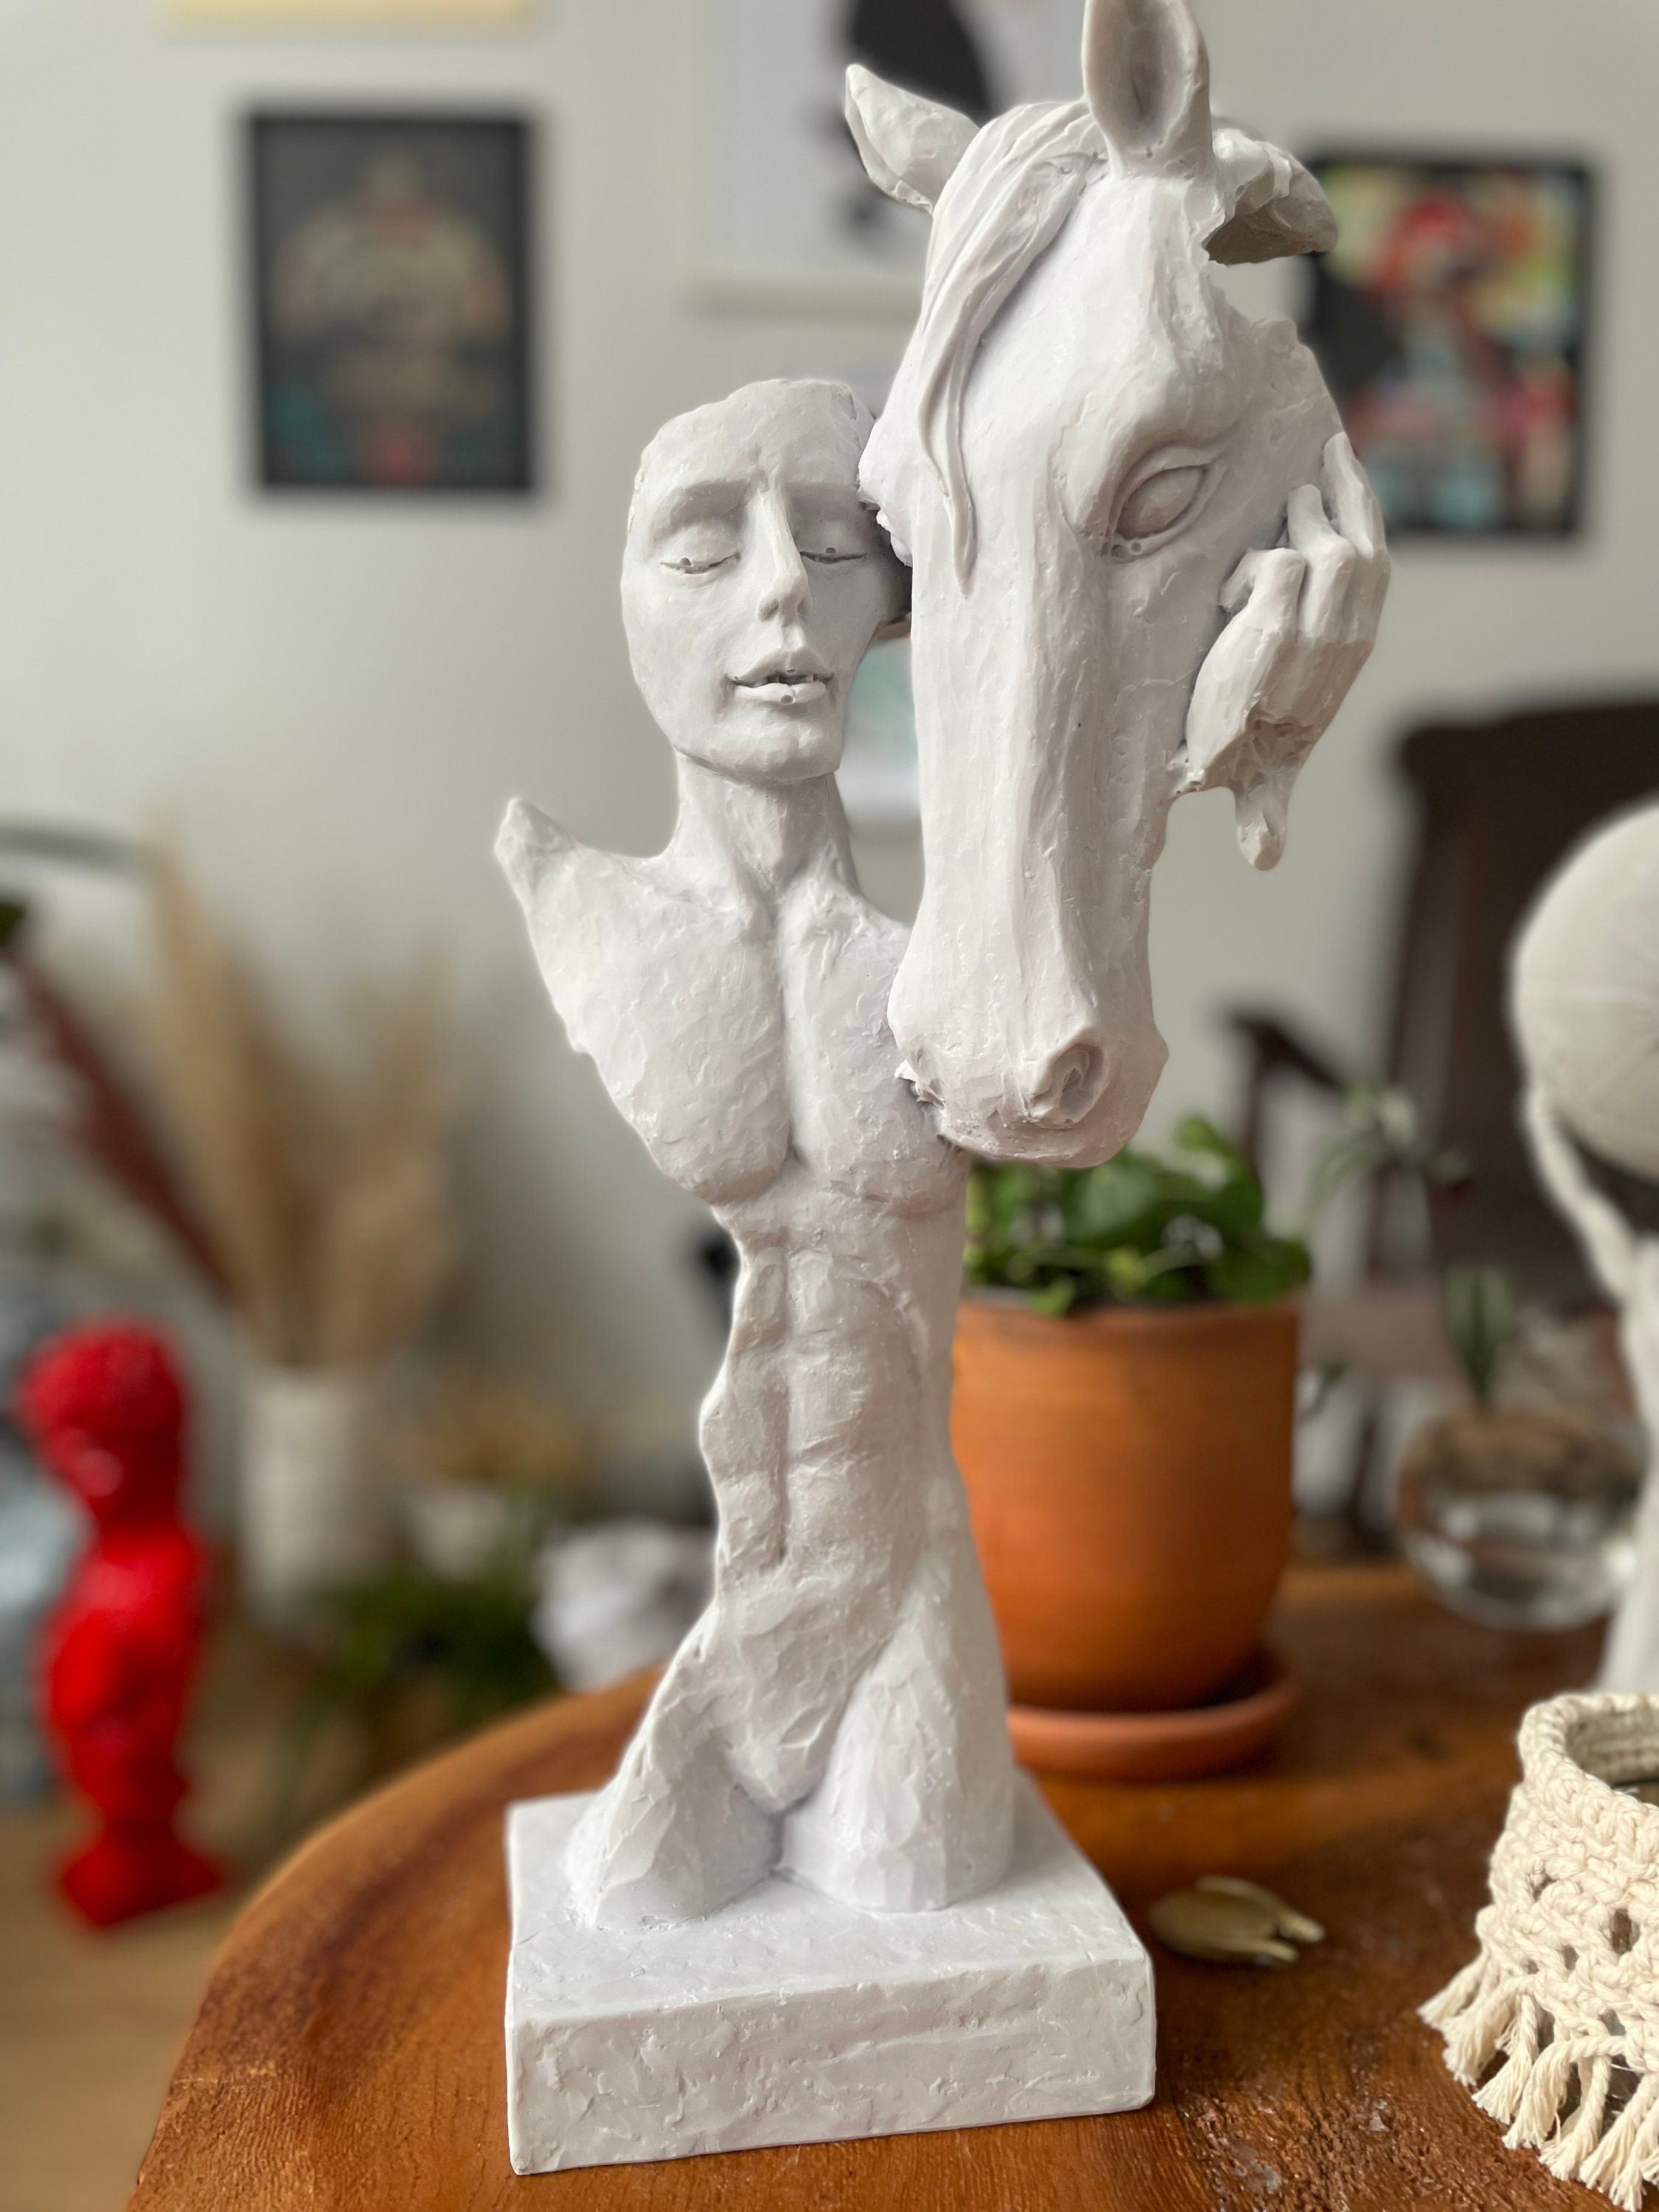 Elegant Sculpture Collection: Abstract, Bust, and Equine Majesty